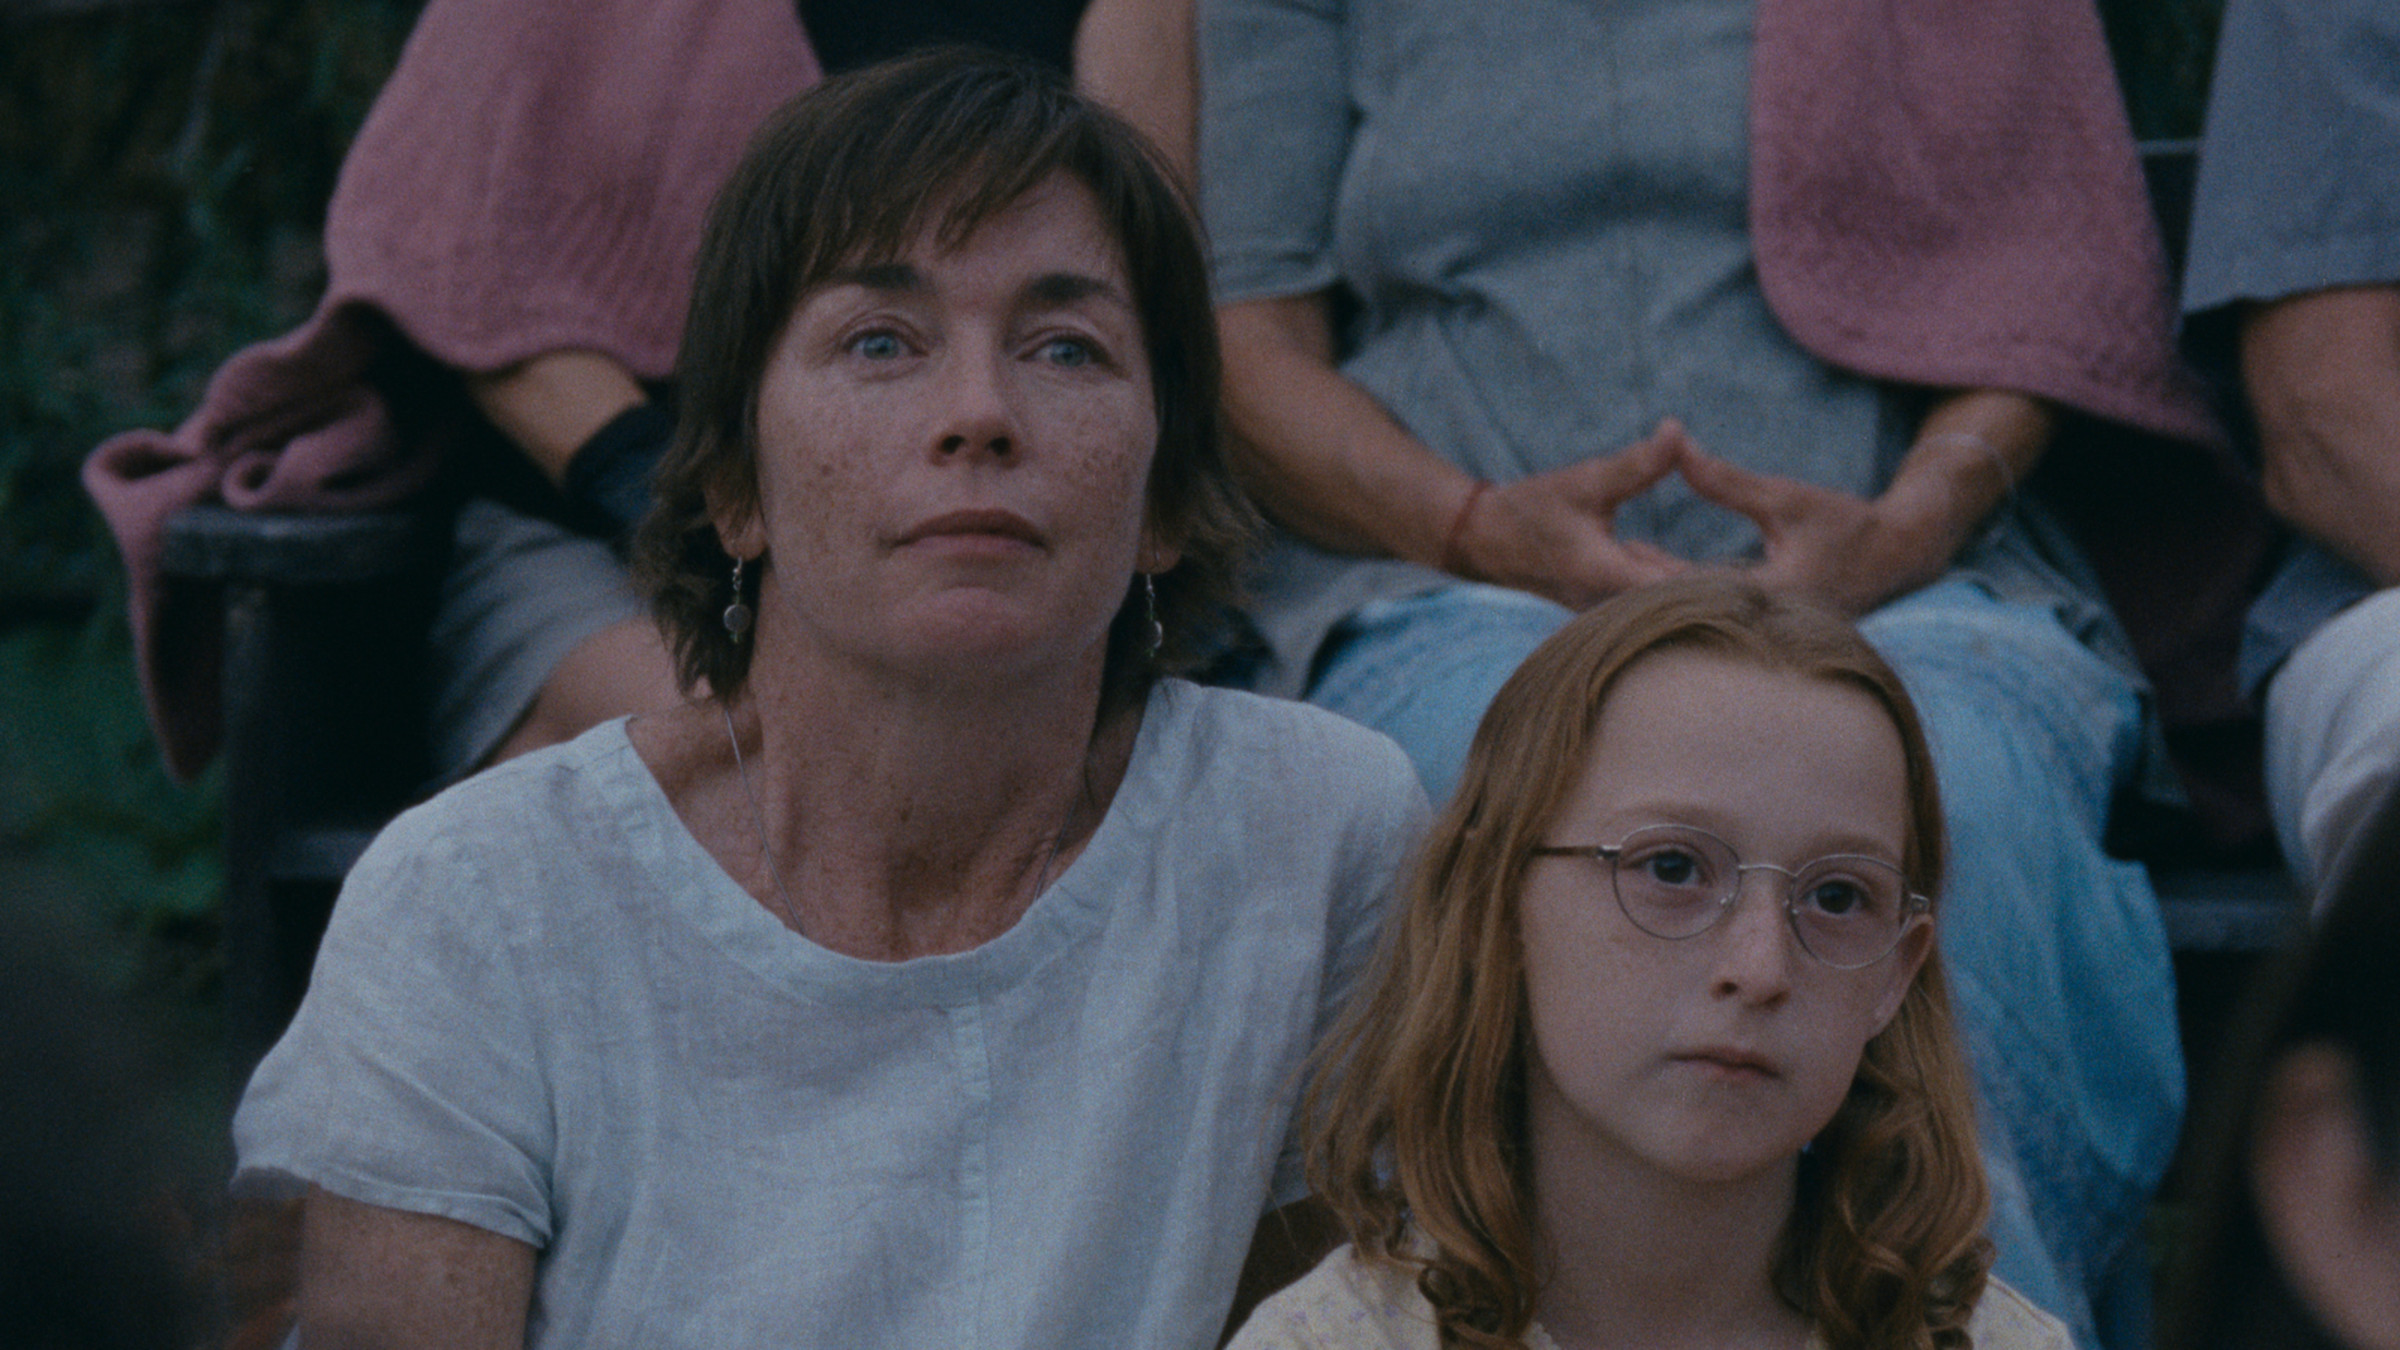 A still from Janet Planet, featuring actresses Julianne Nicholson and Zoe Ziegler as mother and daughter.